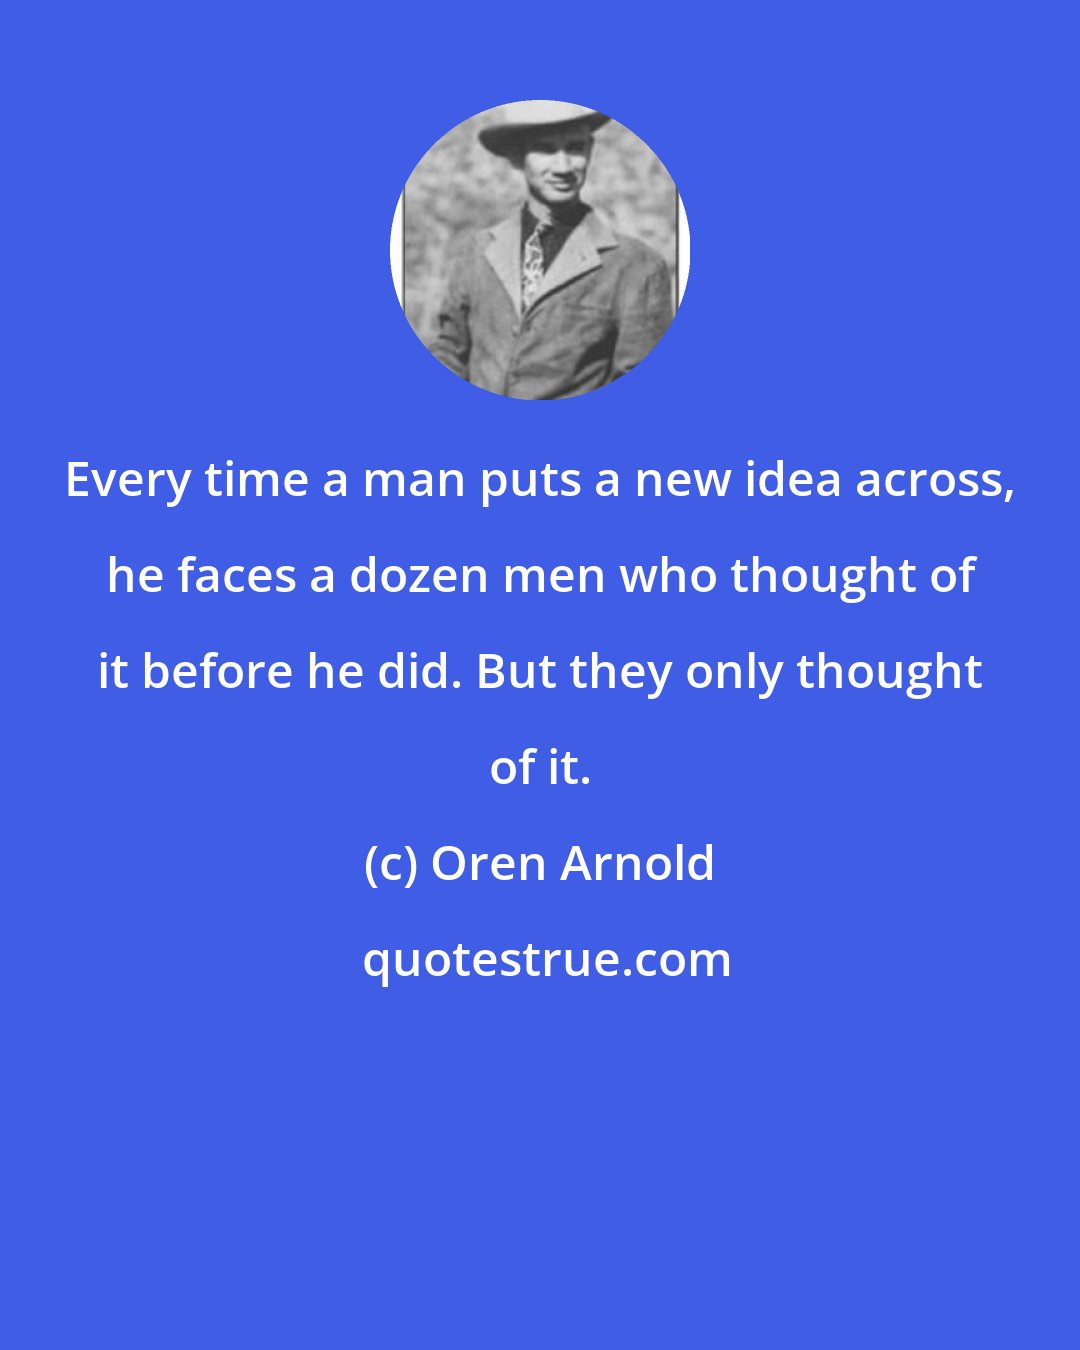 Oren Arnold: Every time a man puts a new idea across, he faces a dozen men who thought of it before he did. But they only thought of it.